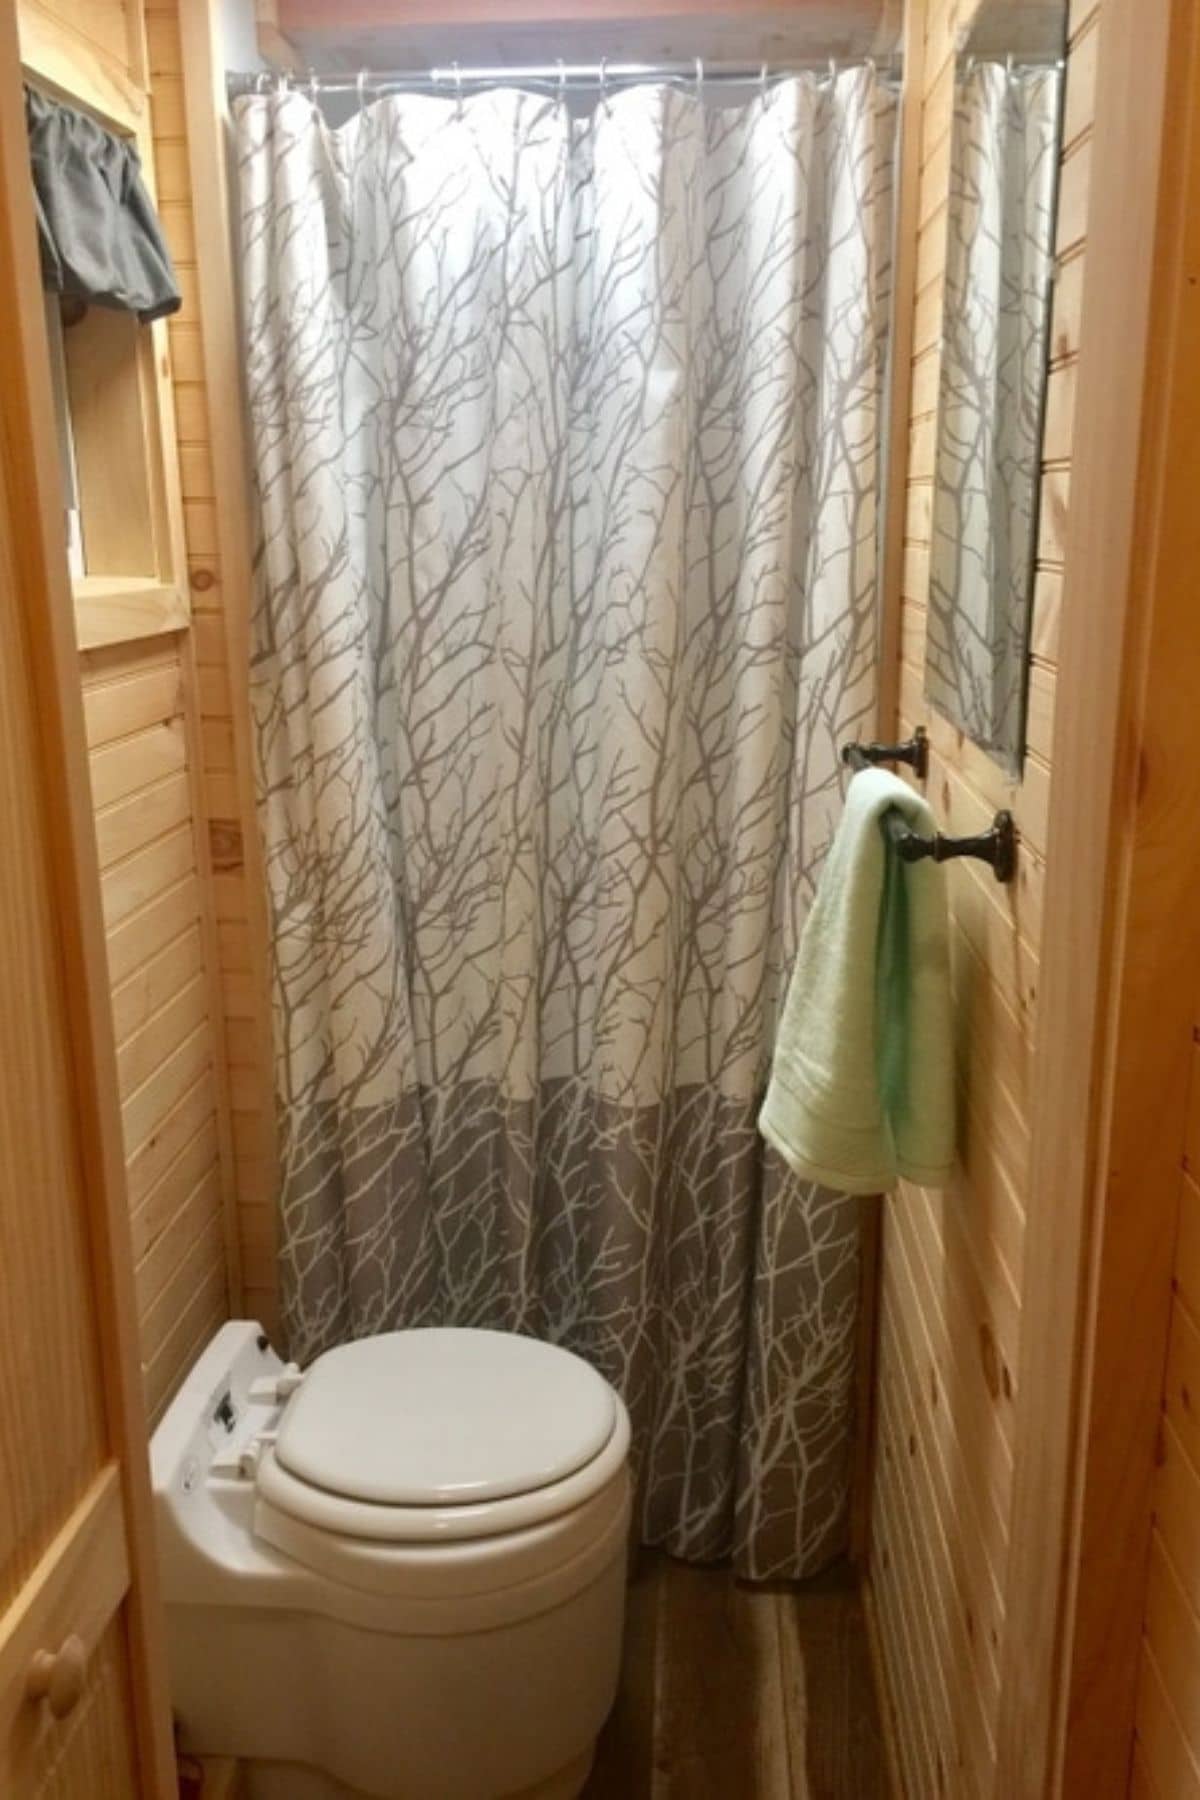 compost toilet in front of shower with green towel on rack beside it